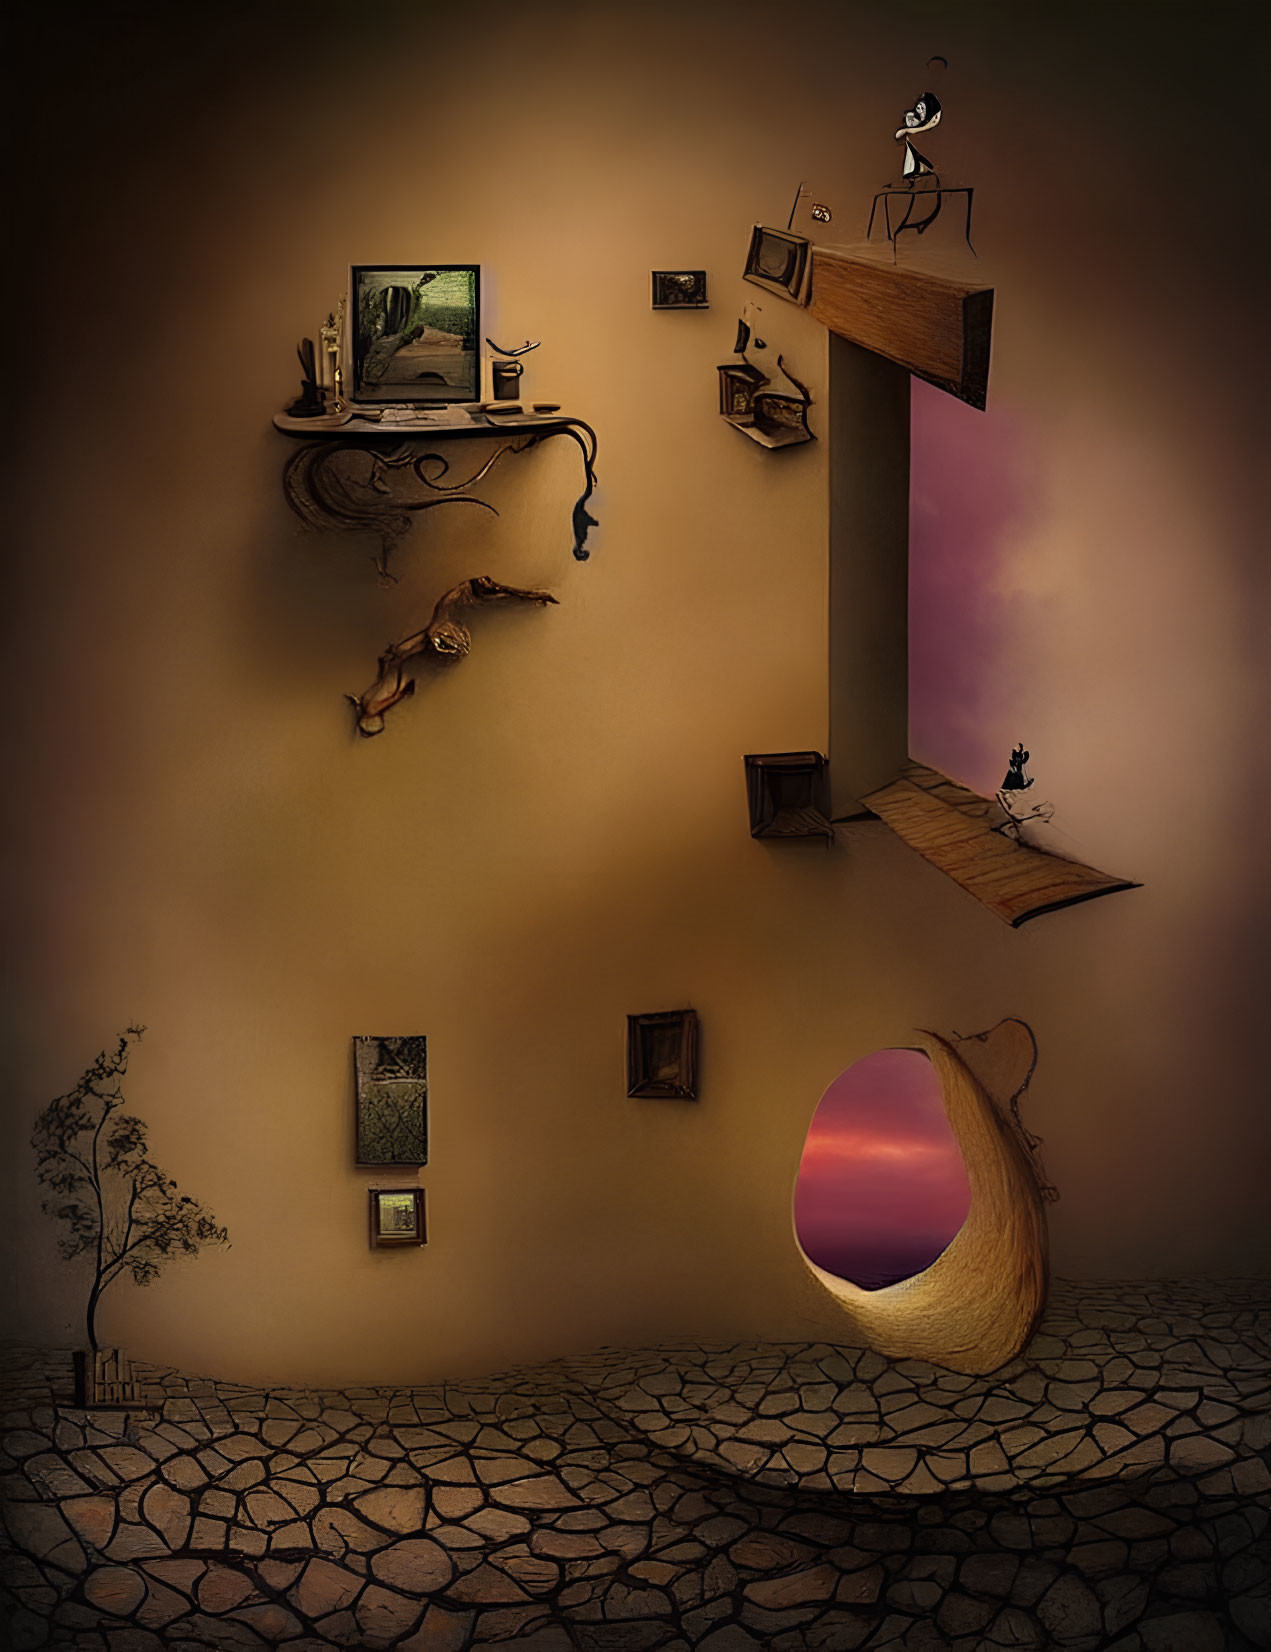 Surreal room with upside-down dog, person on ledge, and furniture on walls